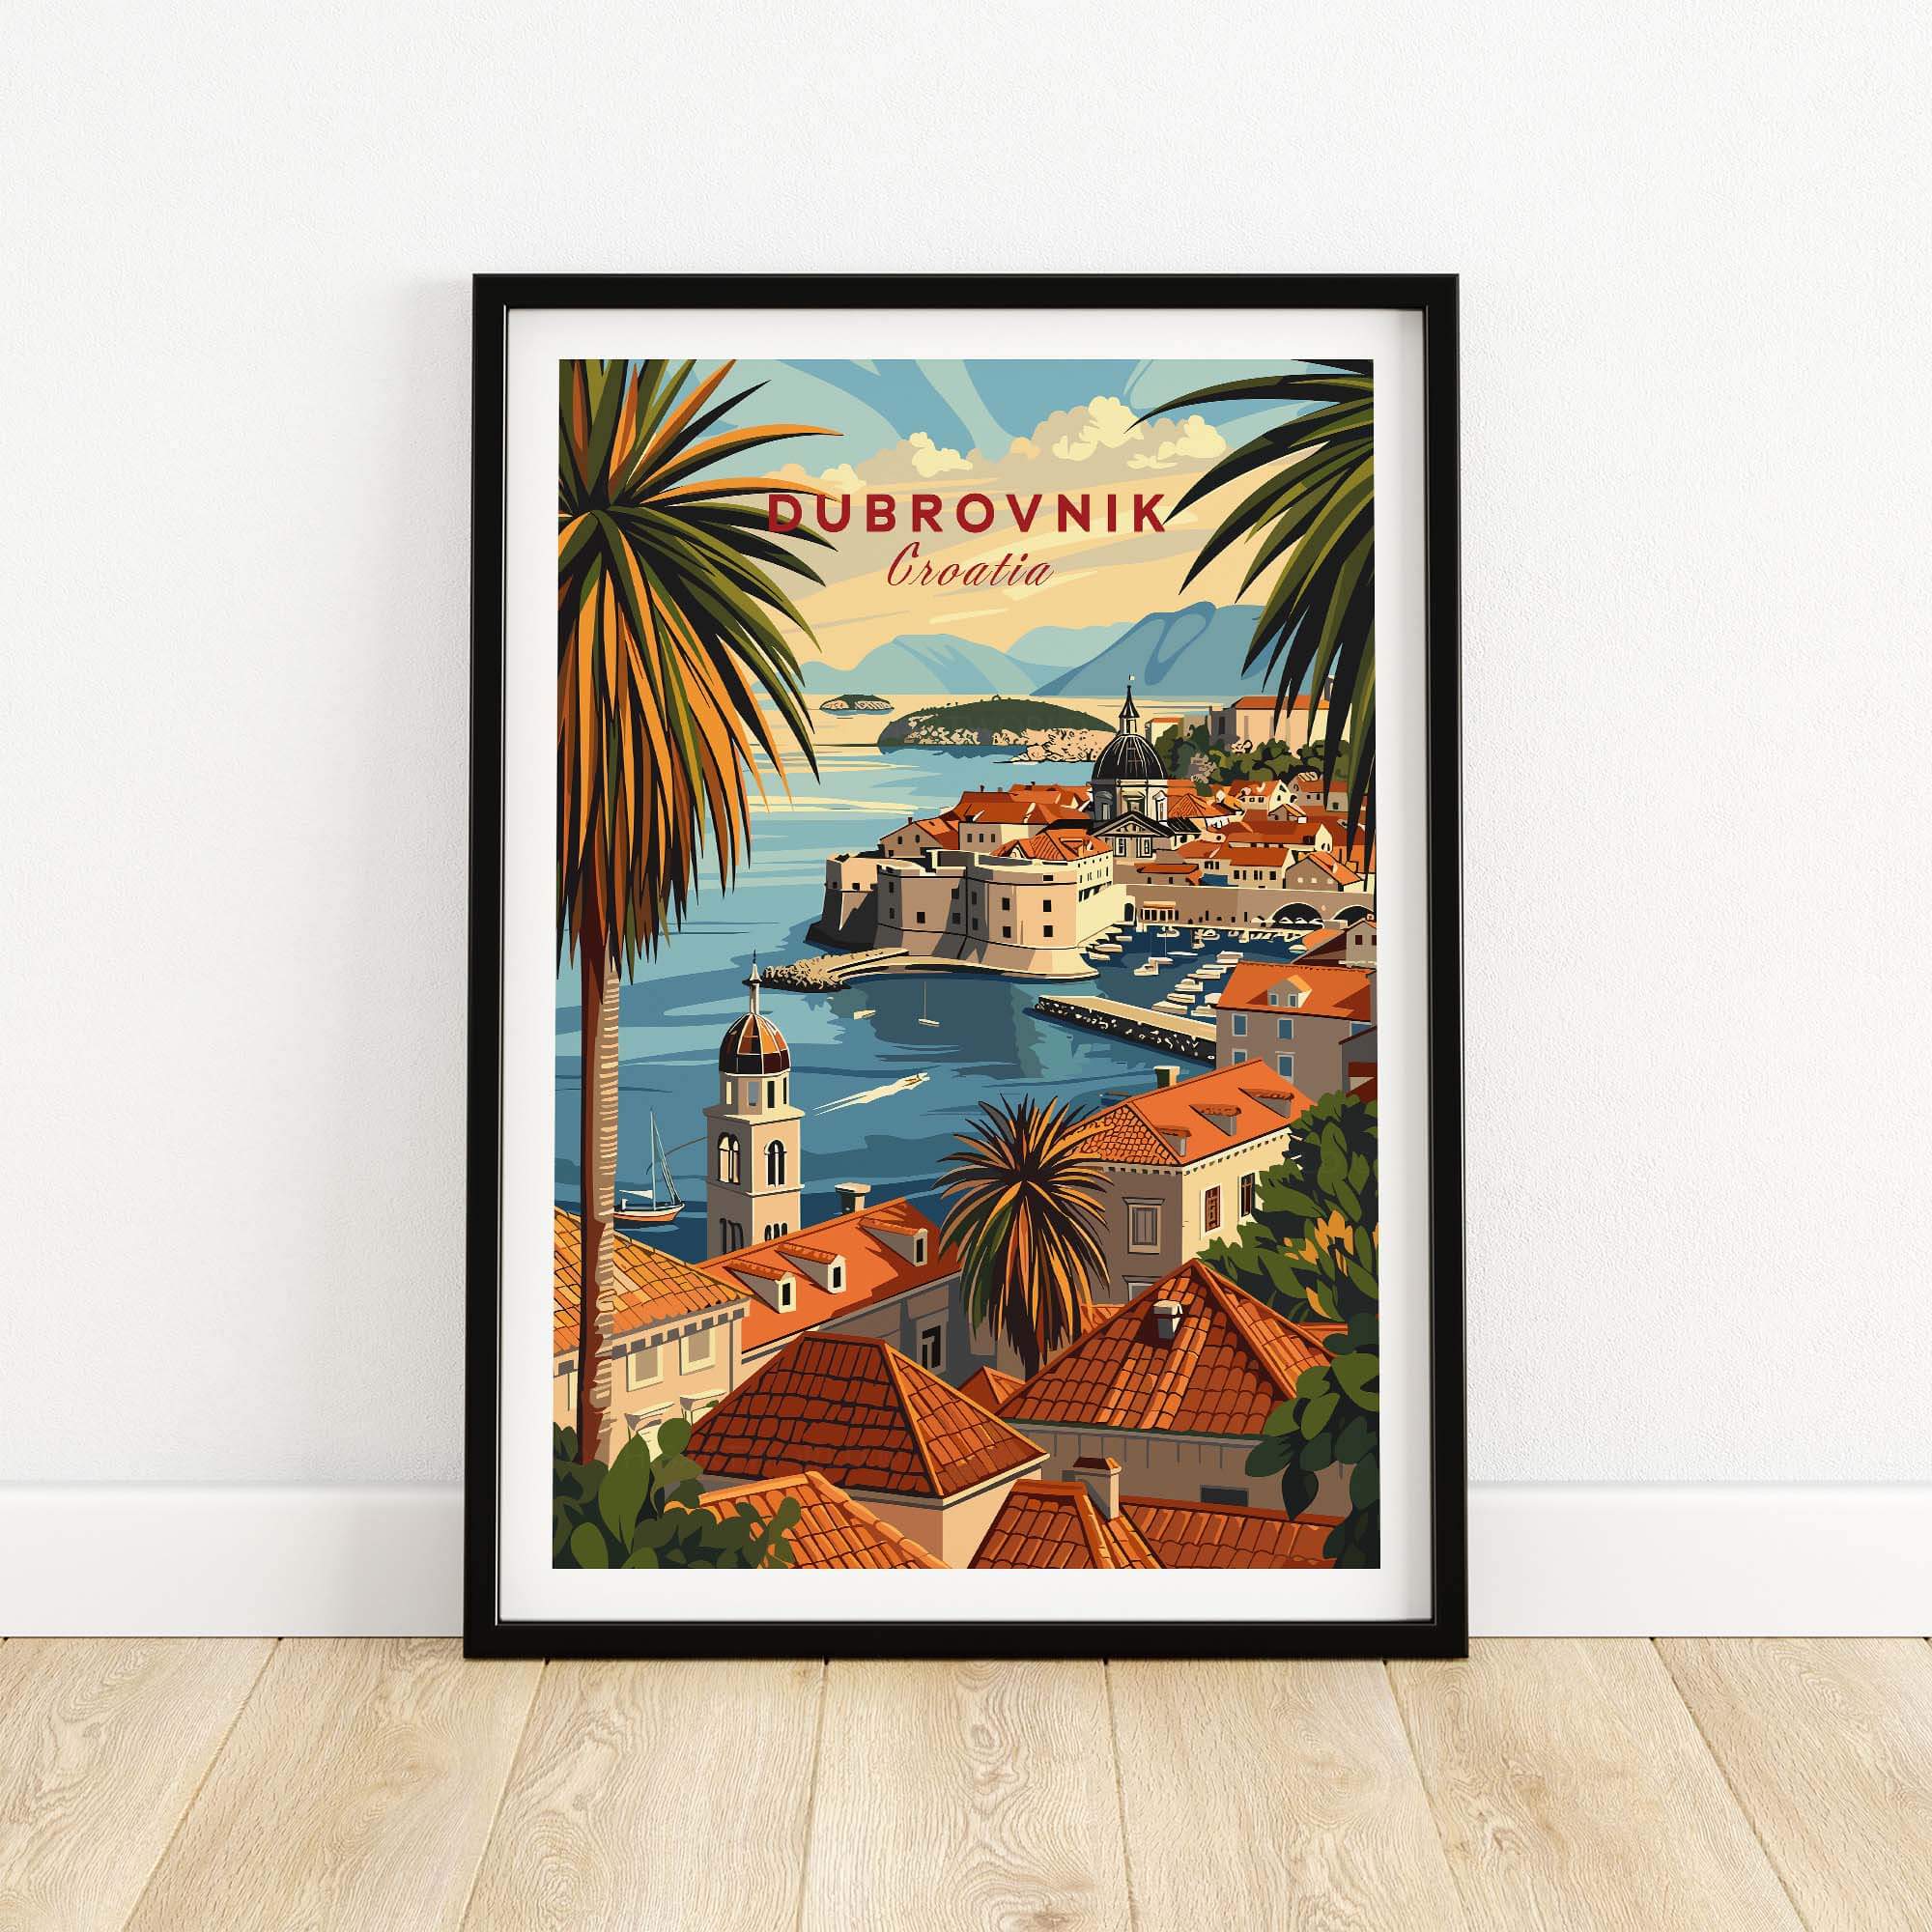 Dubrovnik Poster view our best collection or travel posters and prints - ThisArtWorld